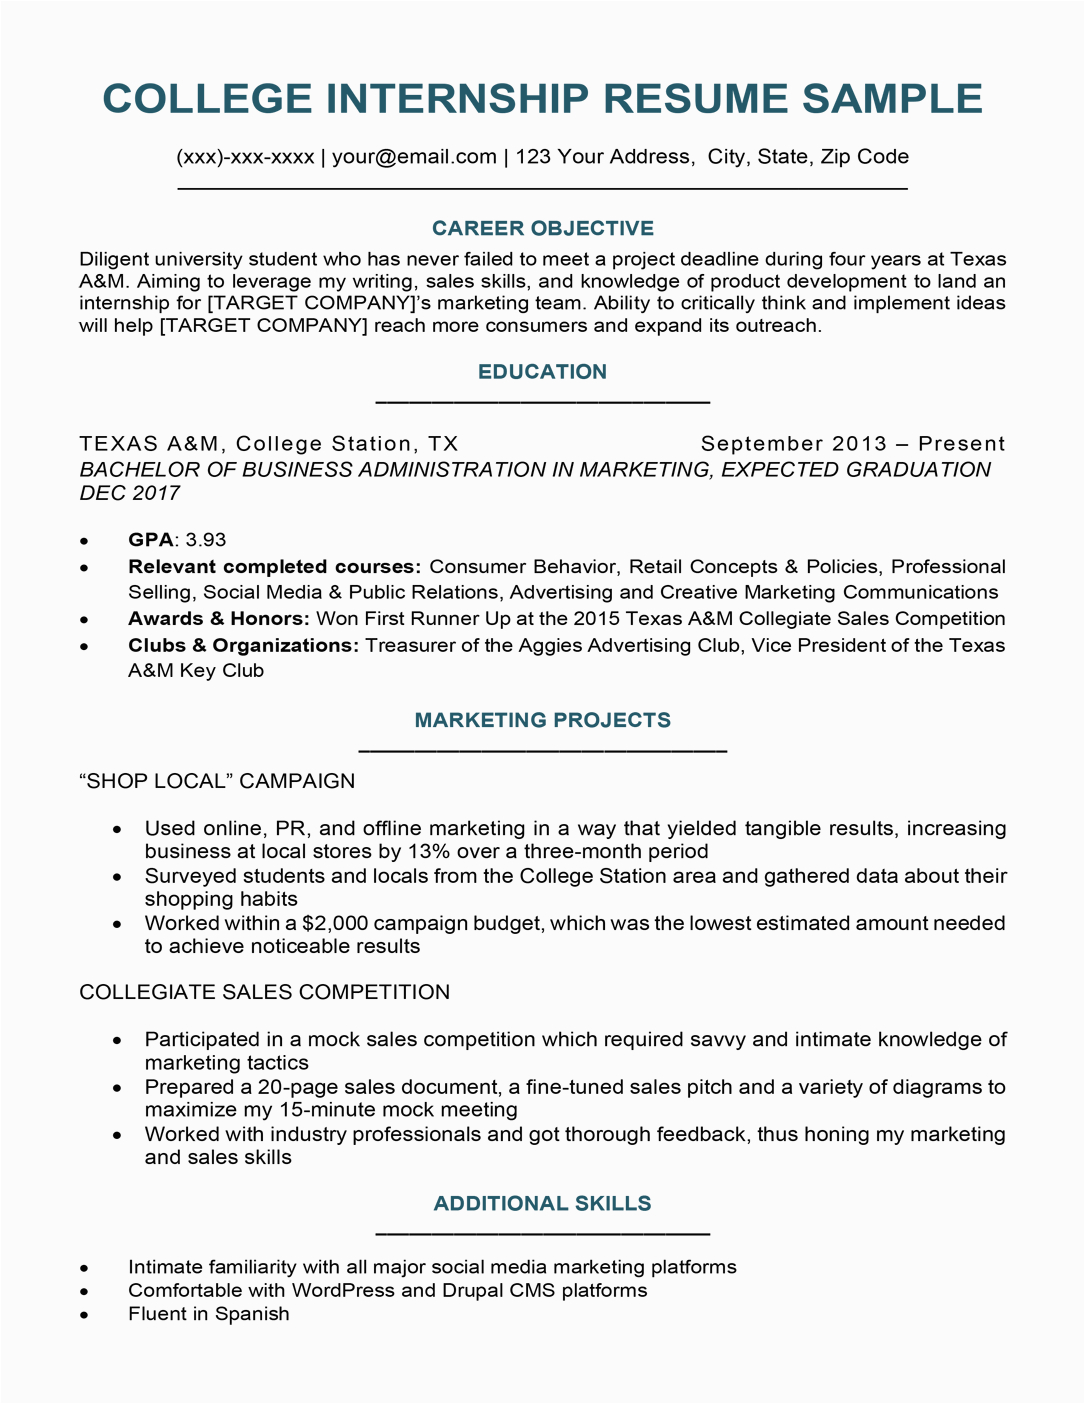 Professional Resume Template for College Students College Student Resume Sample & Writing Tips